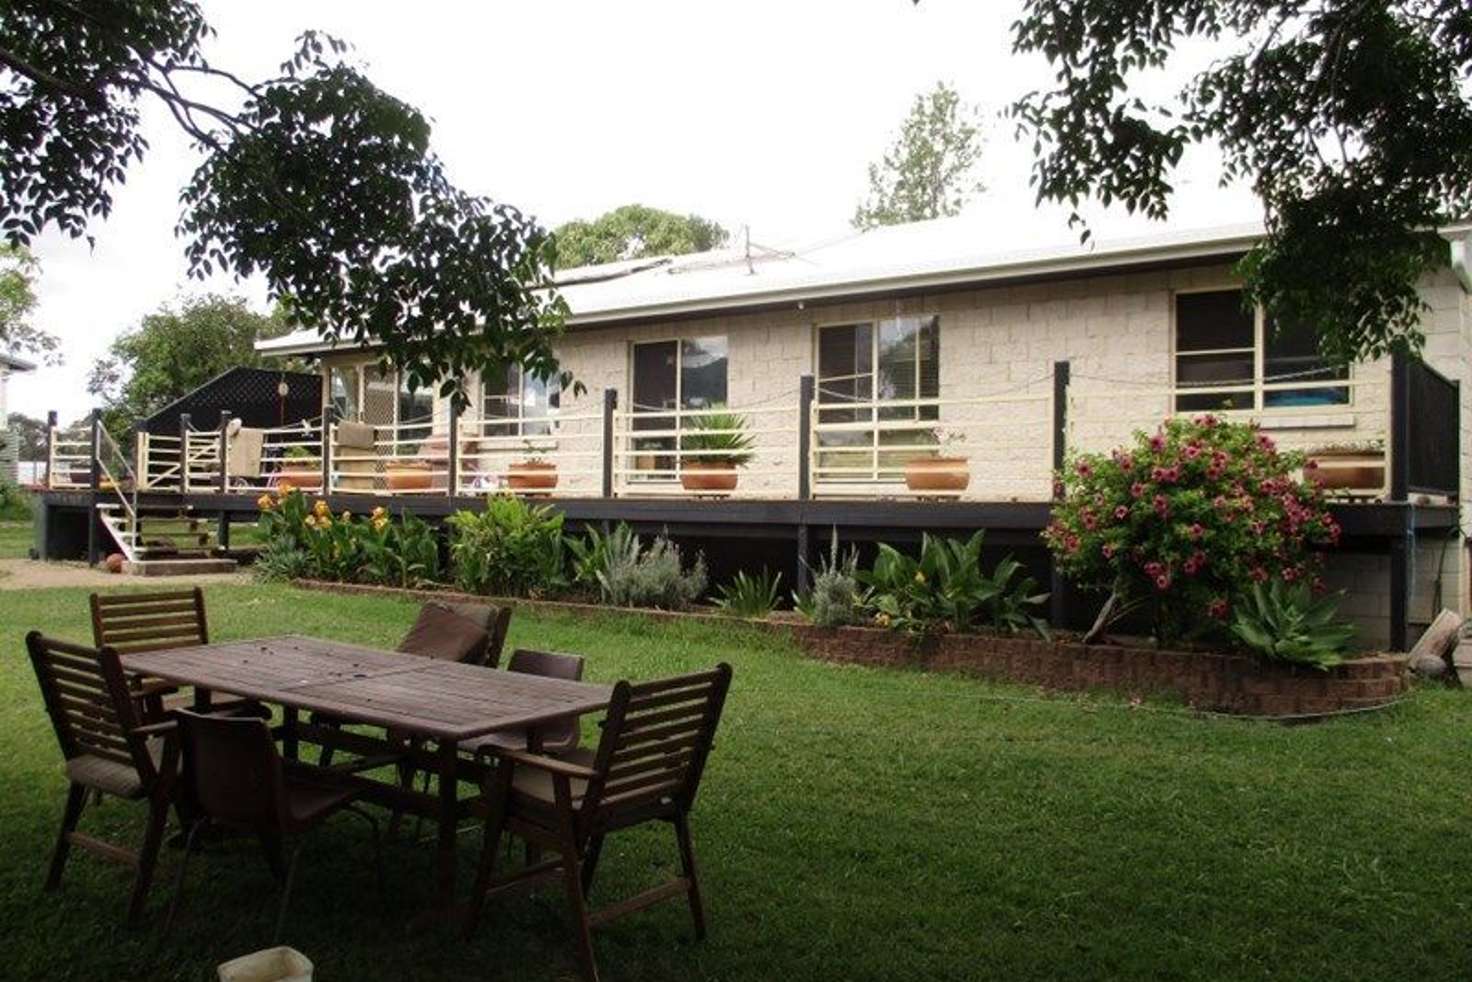 Main view of Homely house listing, 19 Jamieson St, Tiaro QLD 4650